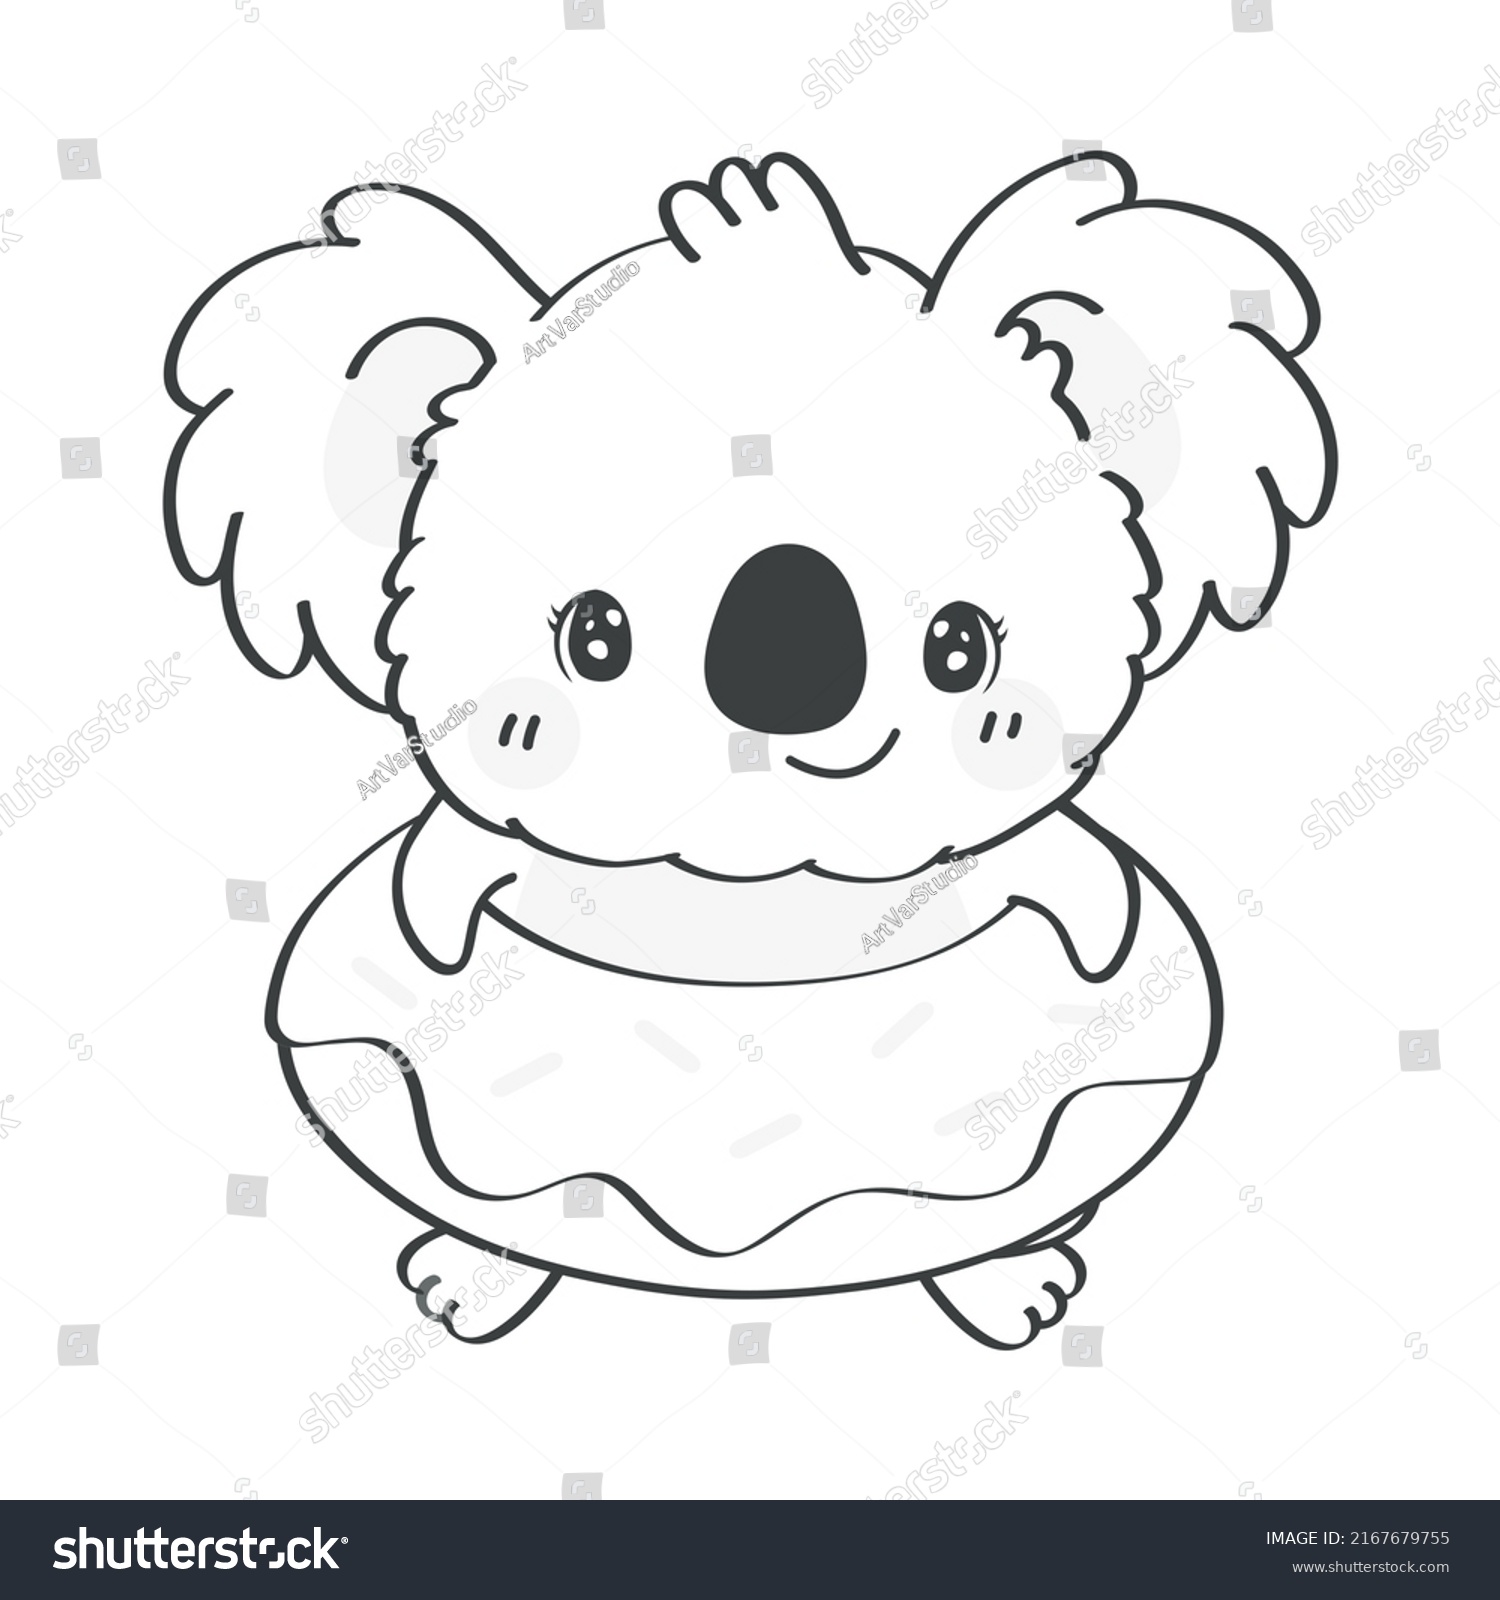 SVG of Cute Clipart Koala Bear Black and White Illustration in Cartoon Style. Cartoon Clip Art Coloring Page Koala in a Lifeline. Vector Illustration of an Animal for Stickers, Baby Shower Invitation.  svg